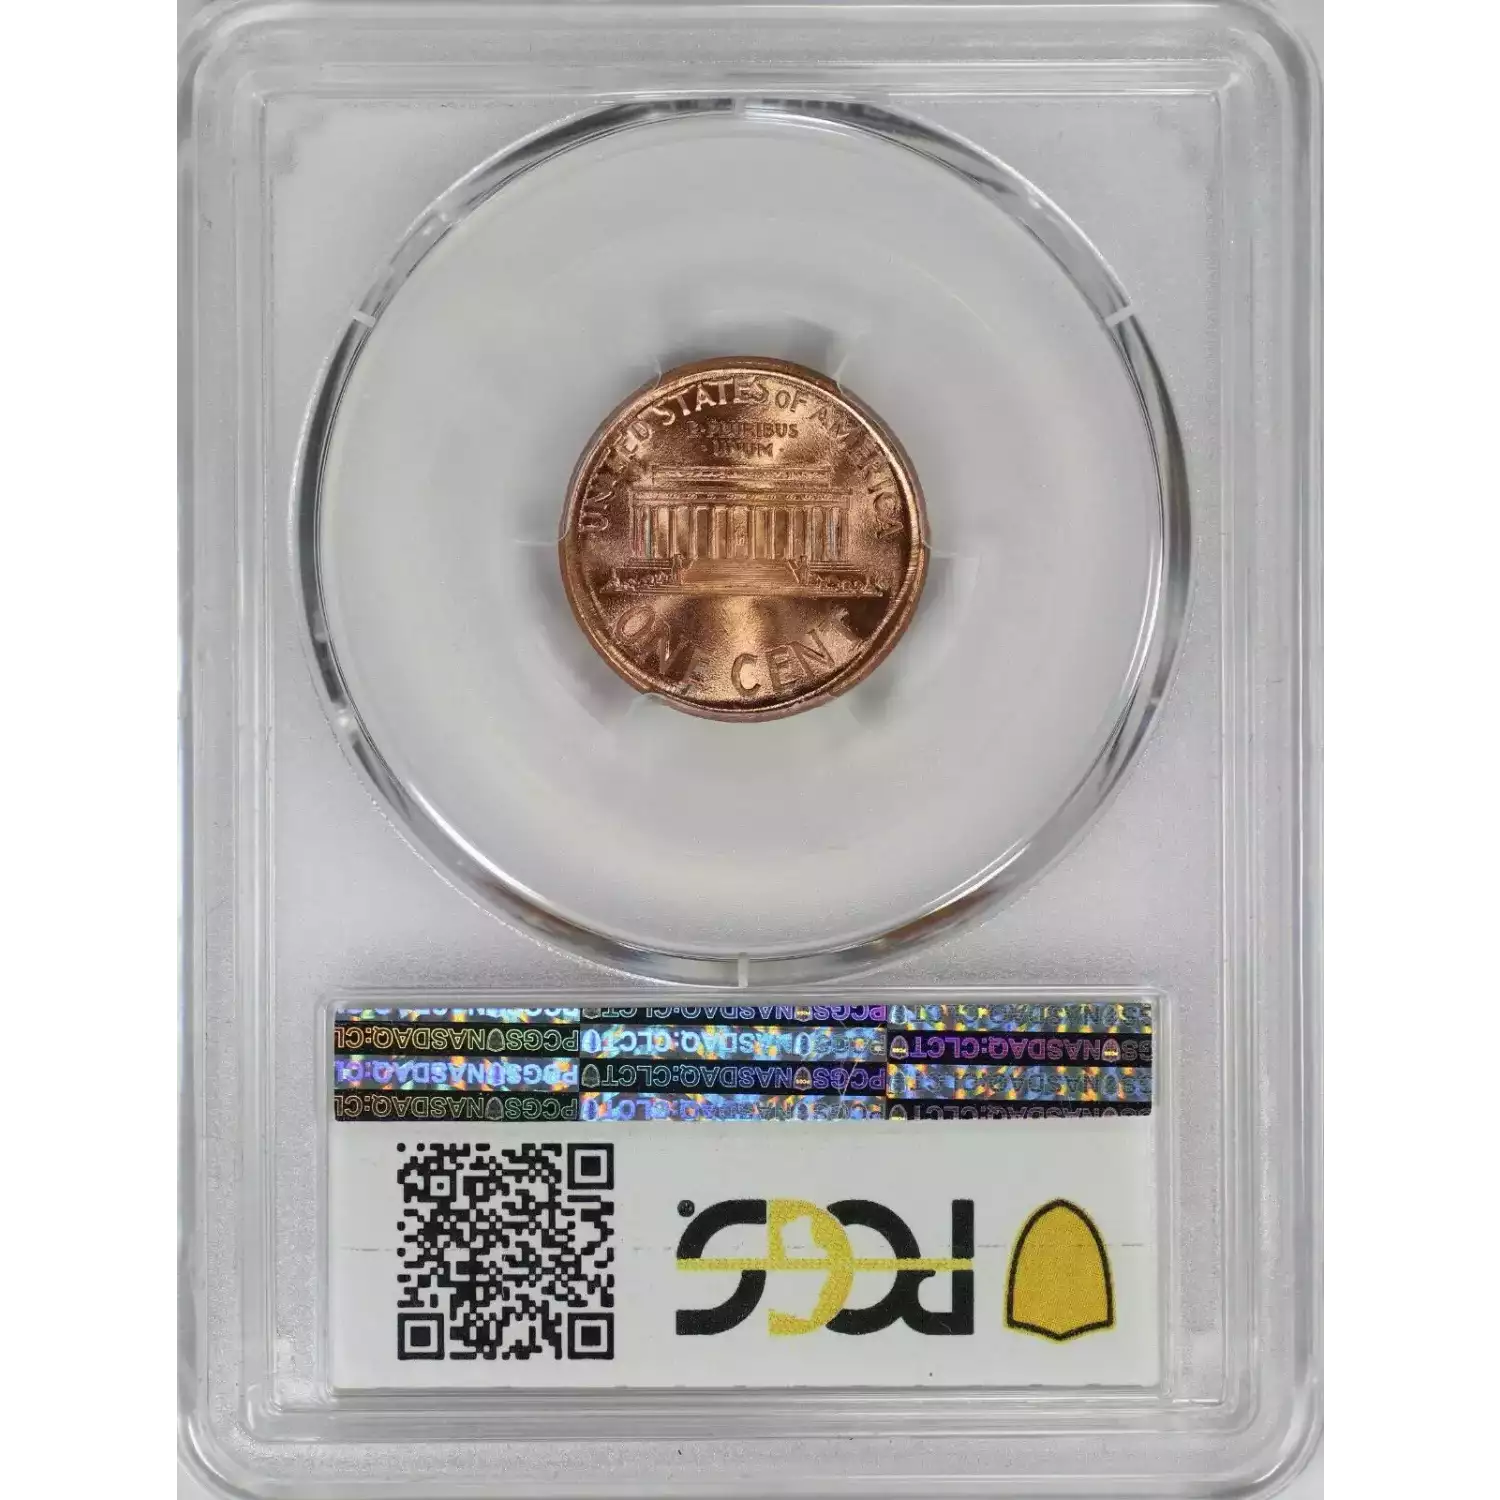 https://kearneycoincenter.com/thumbs/small-cents-lincoln-memorial-reverse-1959-2006-copper-376905-large.jpg